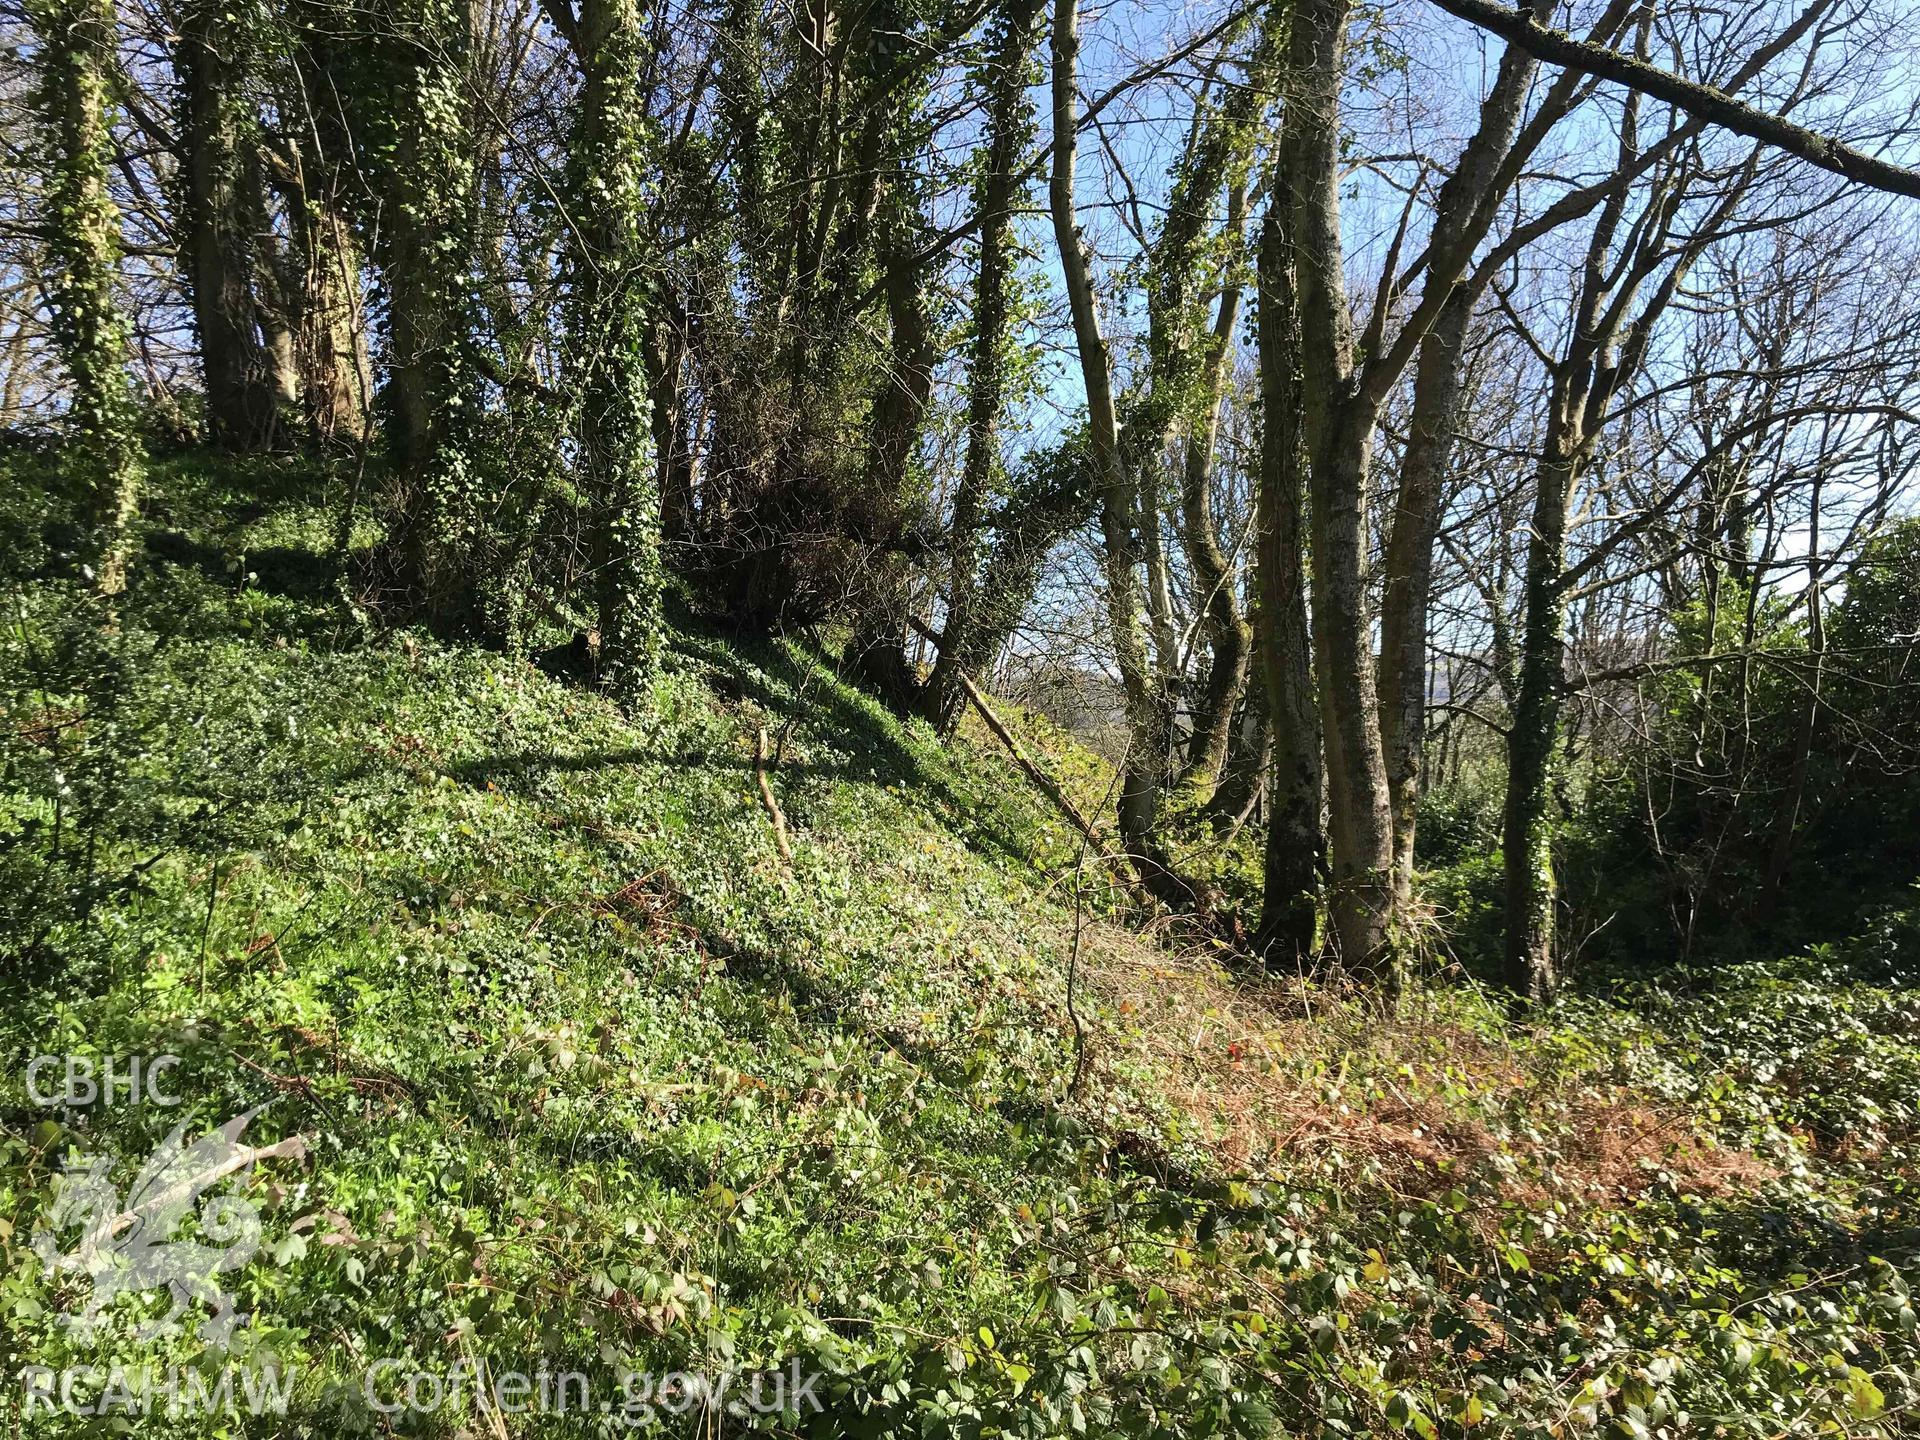 Digital photograph of ditch at Clyro Castle, produced by Paul Davis in 2020